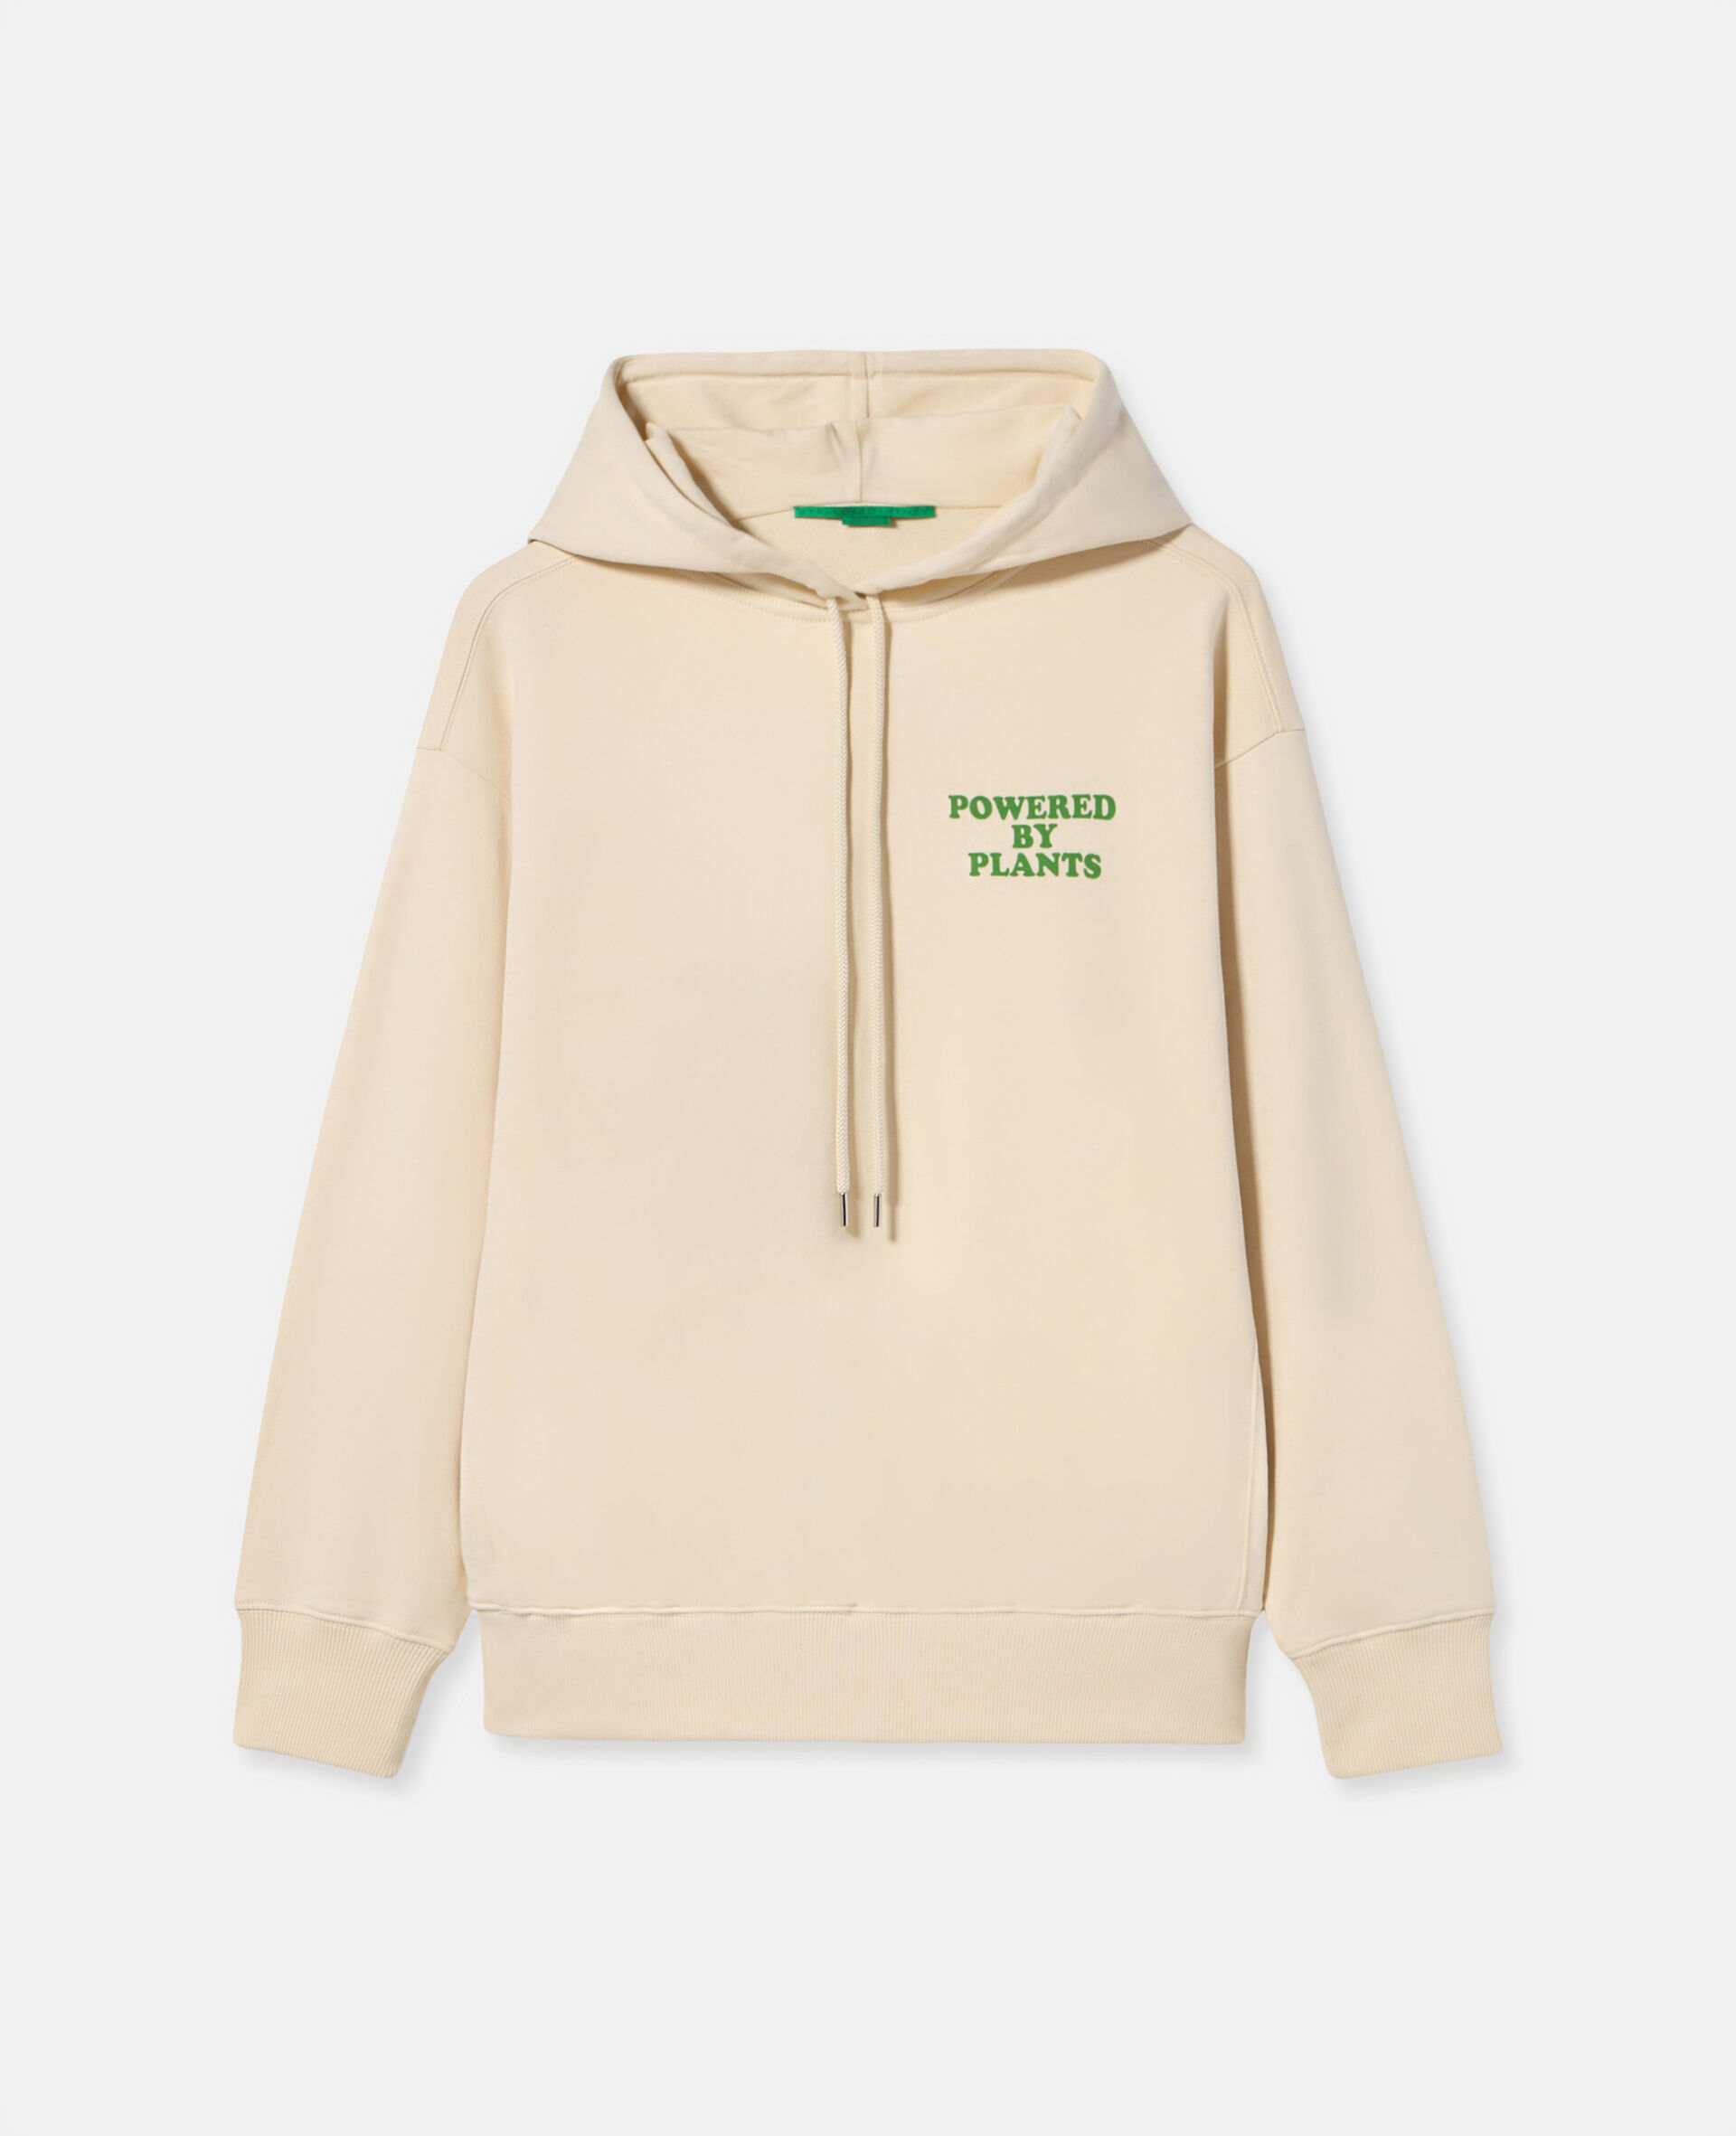 'Powered By Plants' Graphic Hoodie-Cream-large image number 0